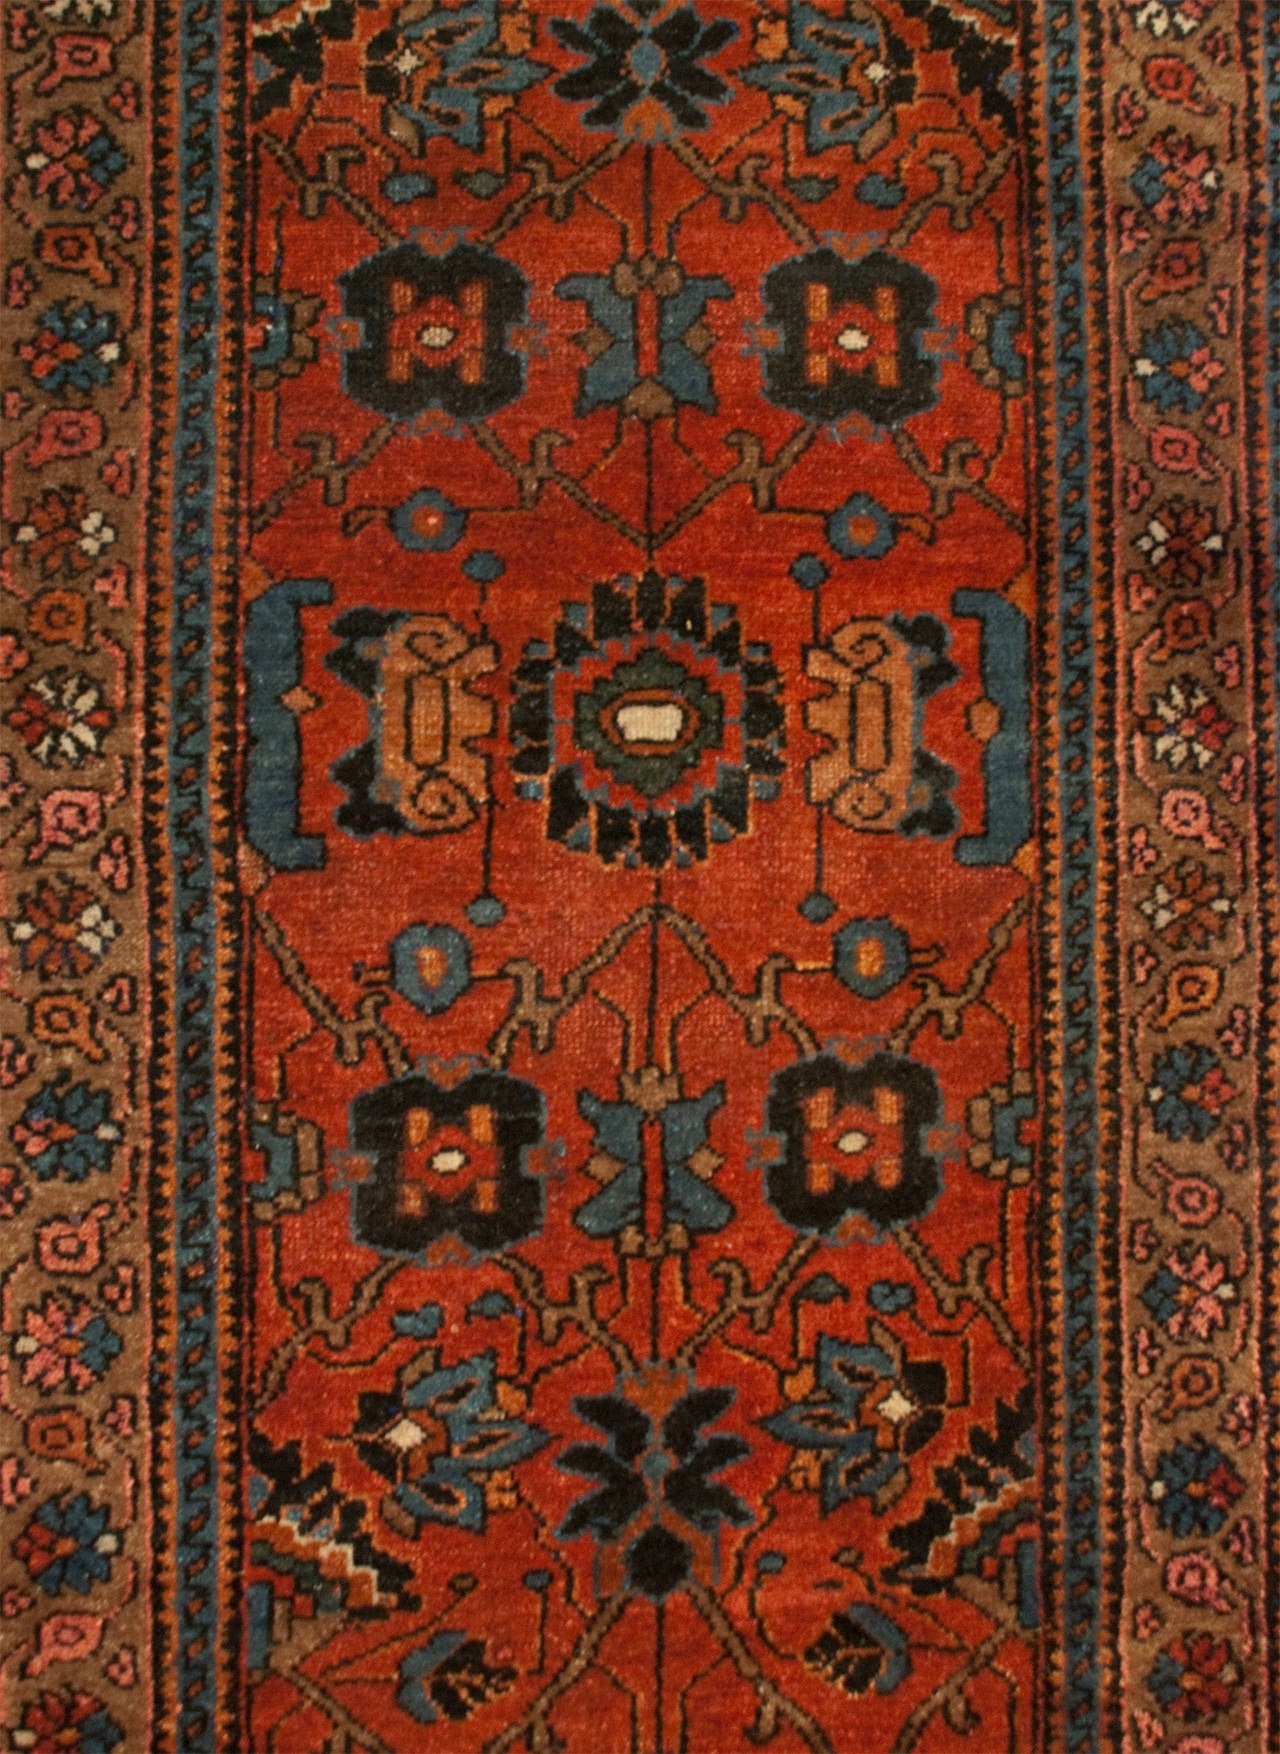 An early 20th century Persian Lilihan runner with an all-over floral pattern, on a rusty-carrot background, surrounded by a contrasting floral border.